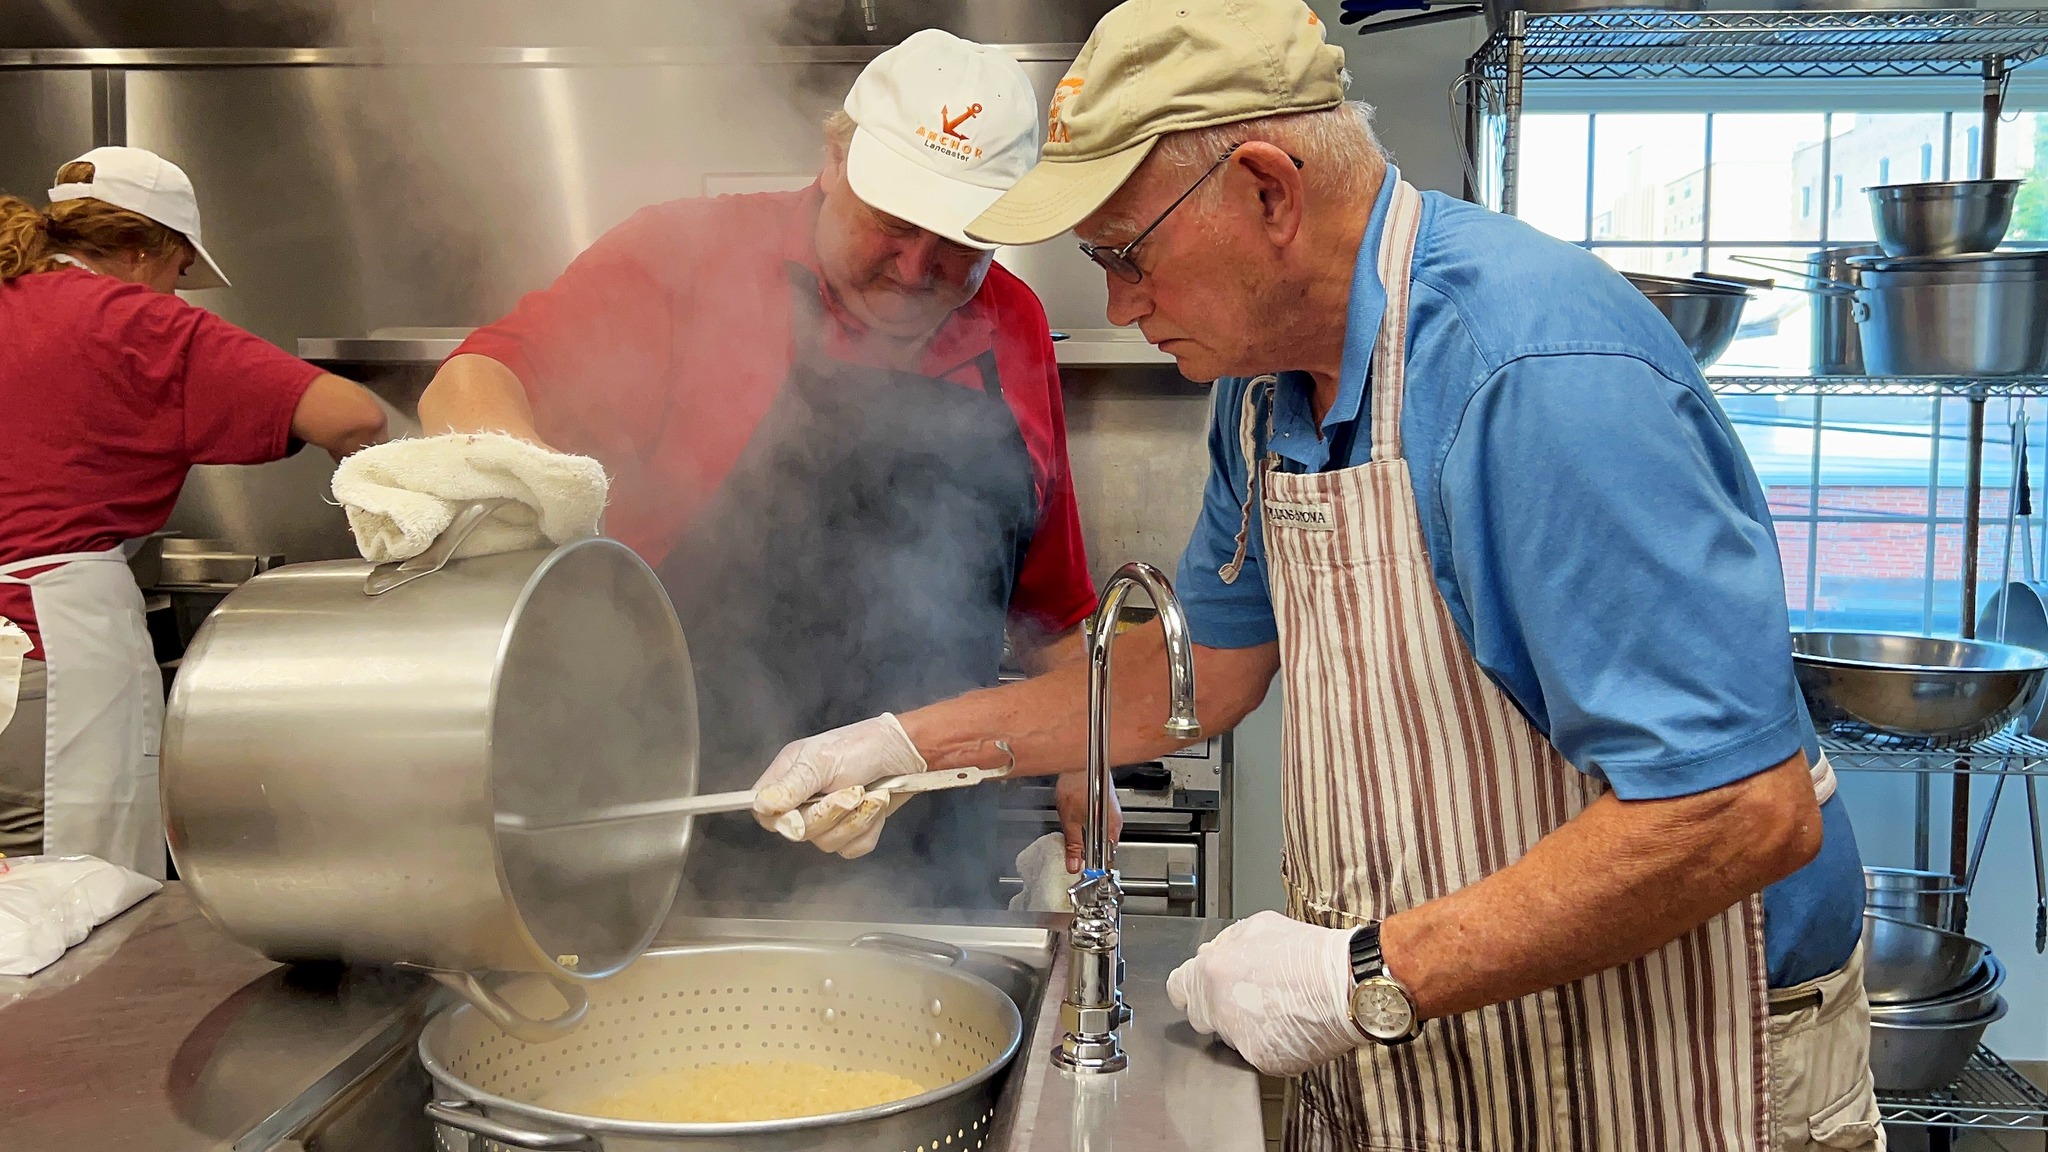 Featured image for “Church’s ministry serves 30,000 breakfasts, opens warming center”